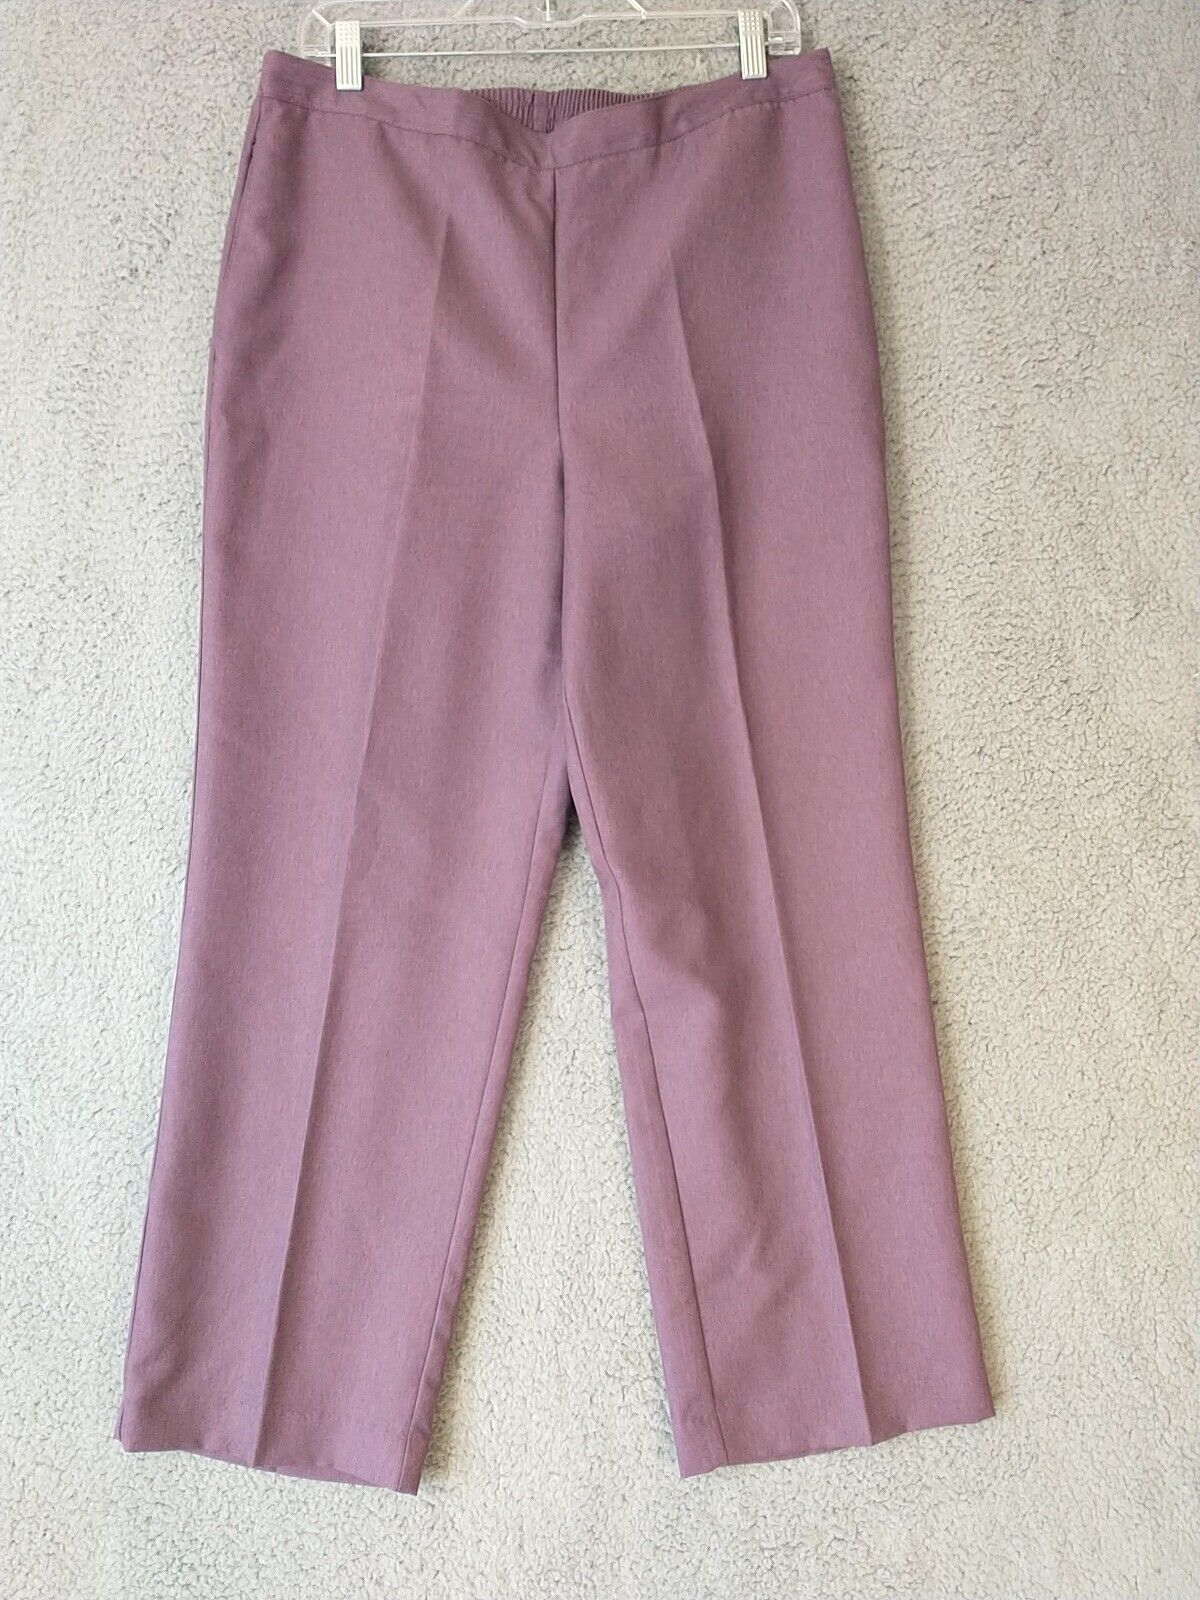 Alfred Dunner Pants | Alfred dunner pants, Mint green pants, Pants for women